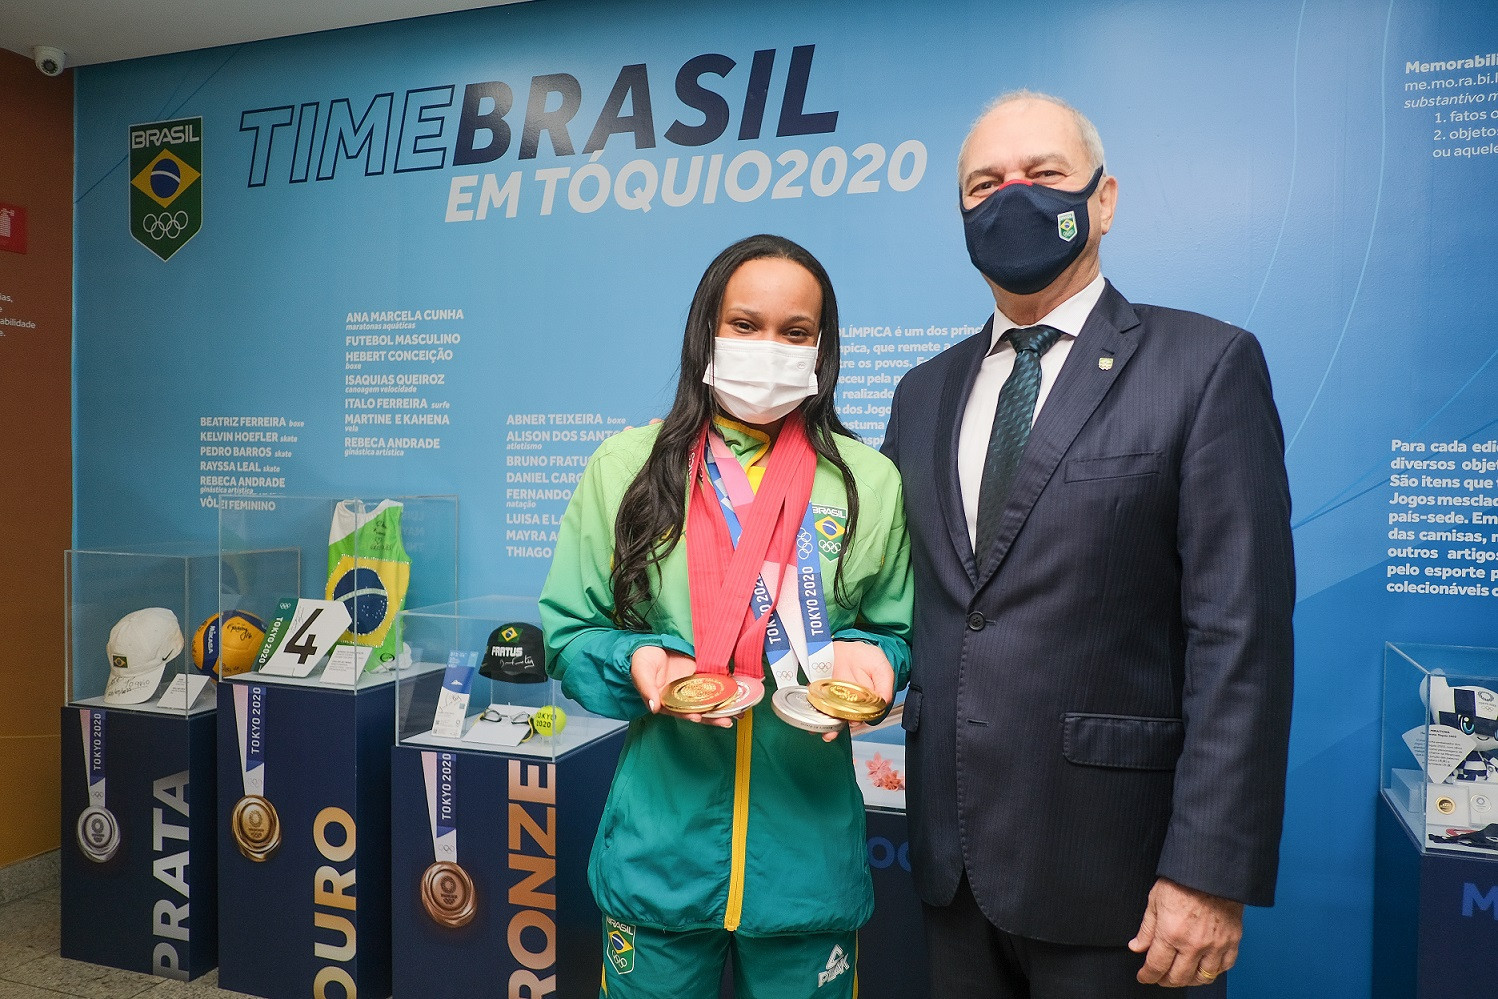 Gymnast Rebeca Andrade shows off her medals with COB President Paulo Wanderley at the exhibition ©COB